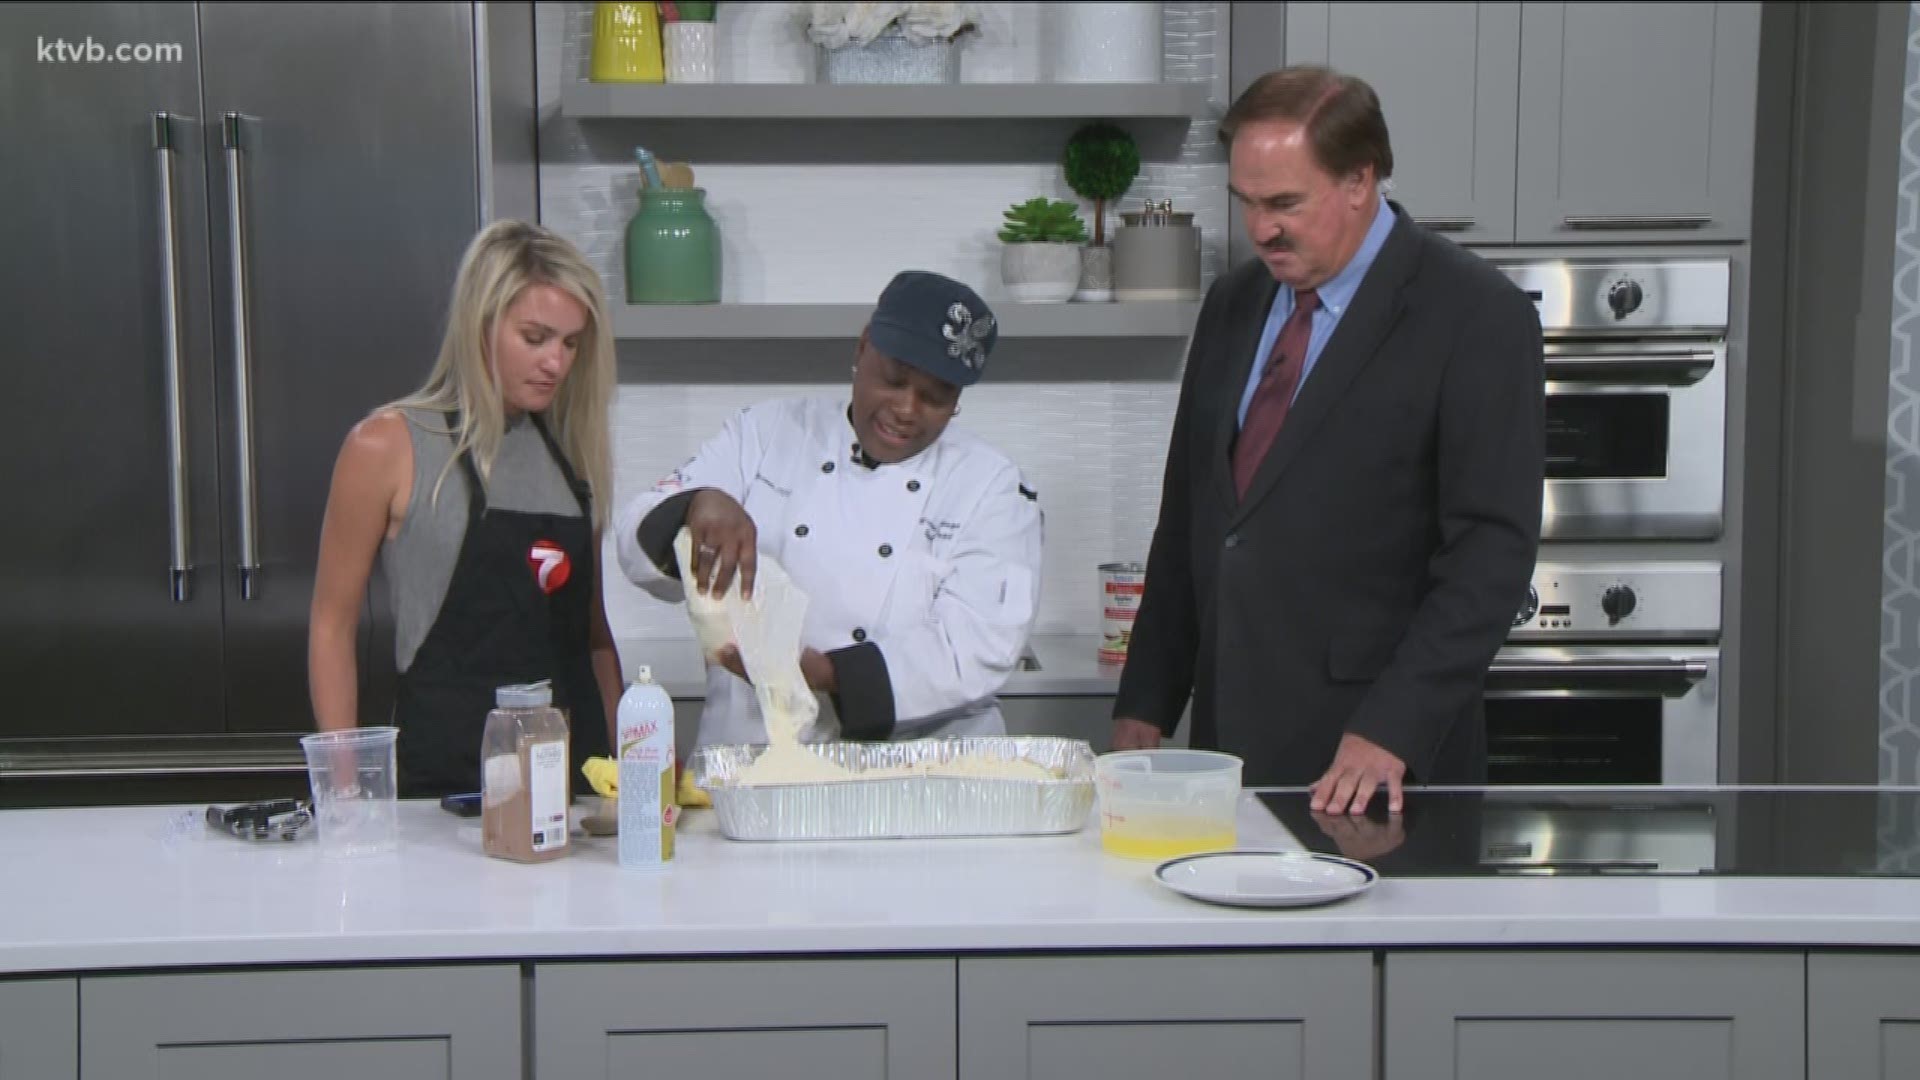 Chef Yvonne Anderson-Thomas is the KTVB kitchen to show us how to make apple cobbler dump cake.